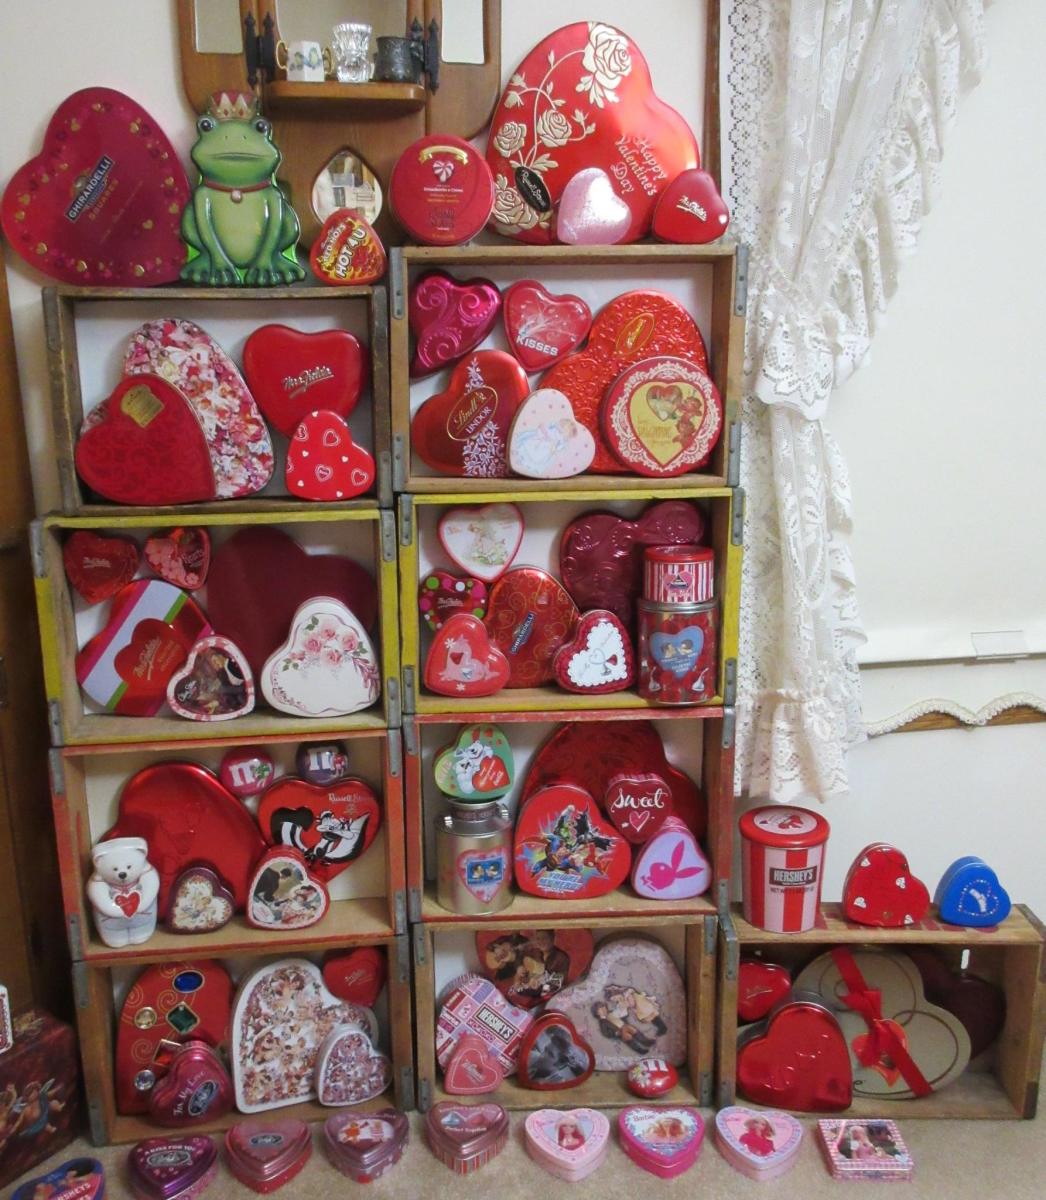 In February, she displays her heart-shaped tins.